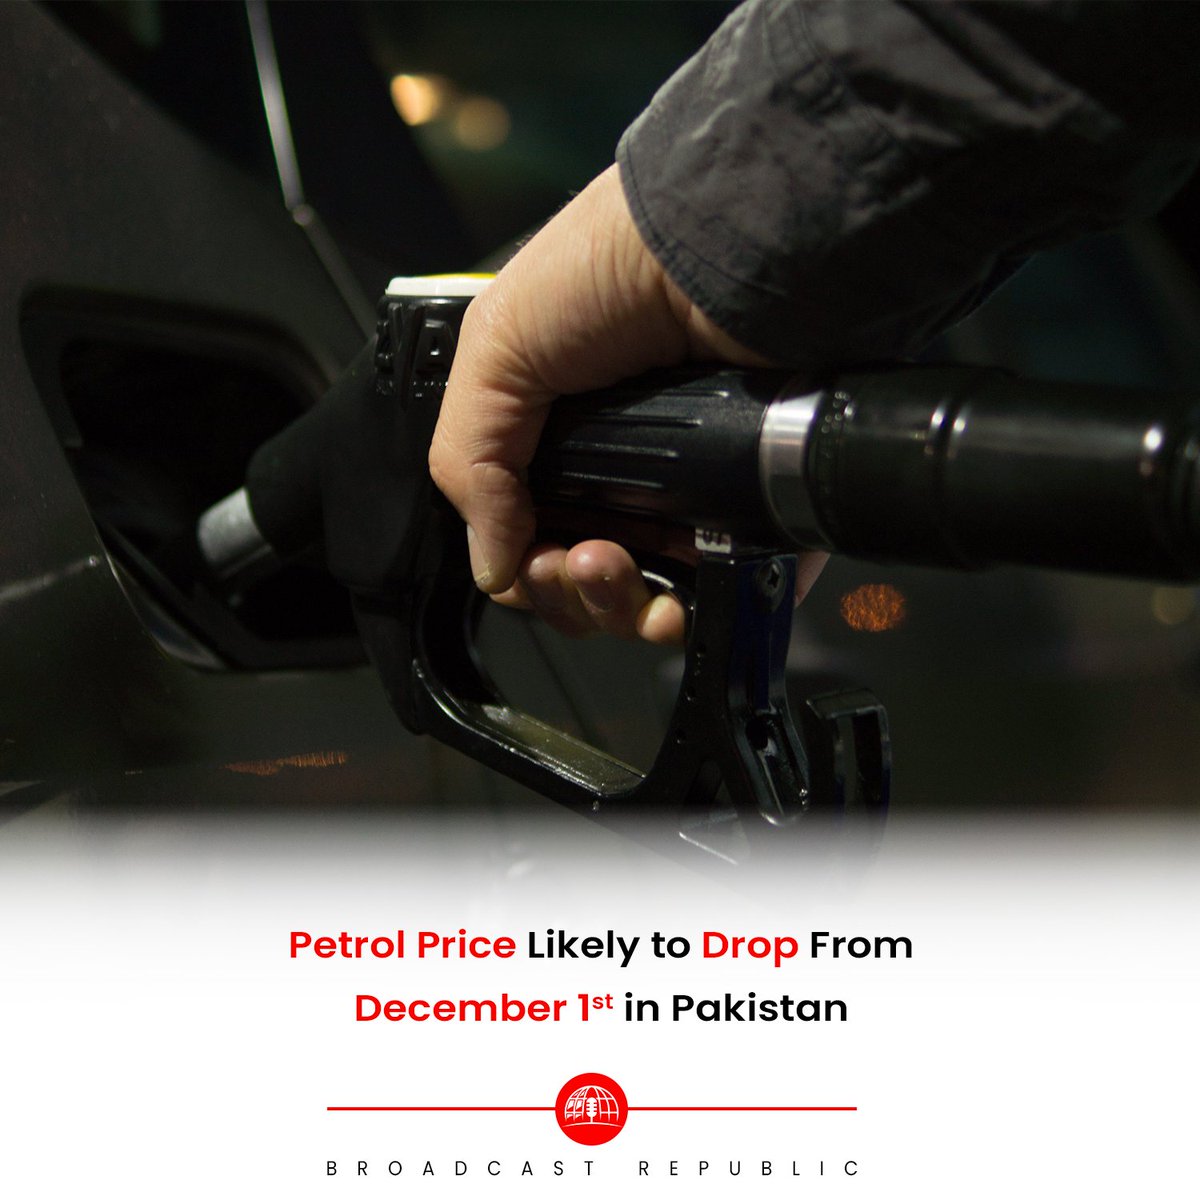 The Oil and Gas Regulatory Authority (OGRA) in Pakistan is considering adjustments to petroleum product prices, with an official announcement expected on December 1st. 

#BroadcastRepublic #PetrolPrices #OGRA #FuelPrice #GlobalOilMarket #PakistanNews